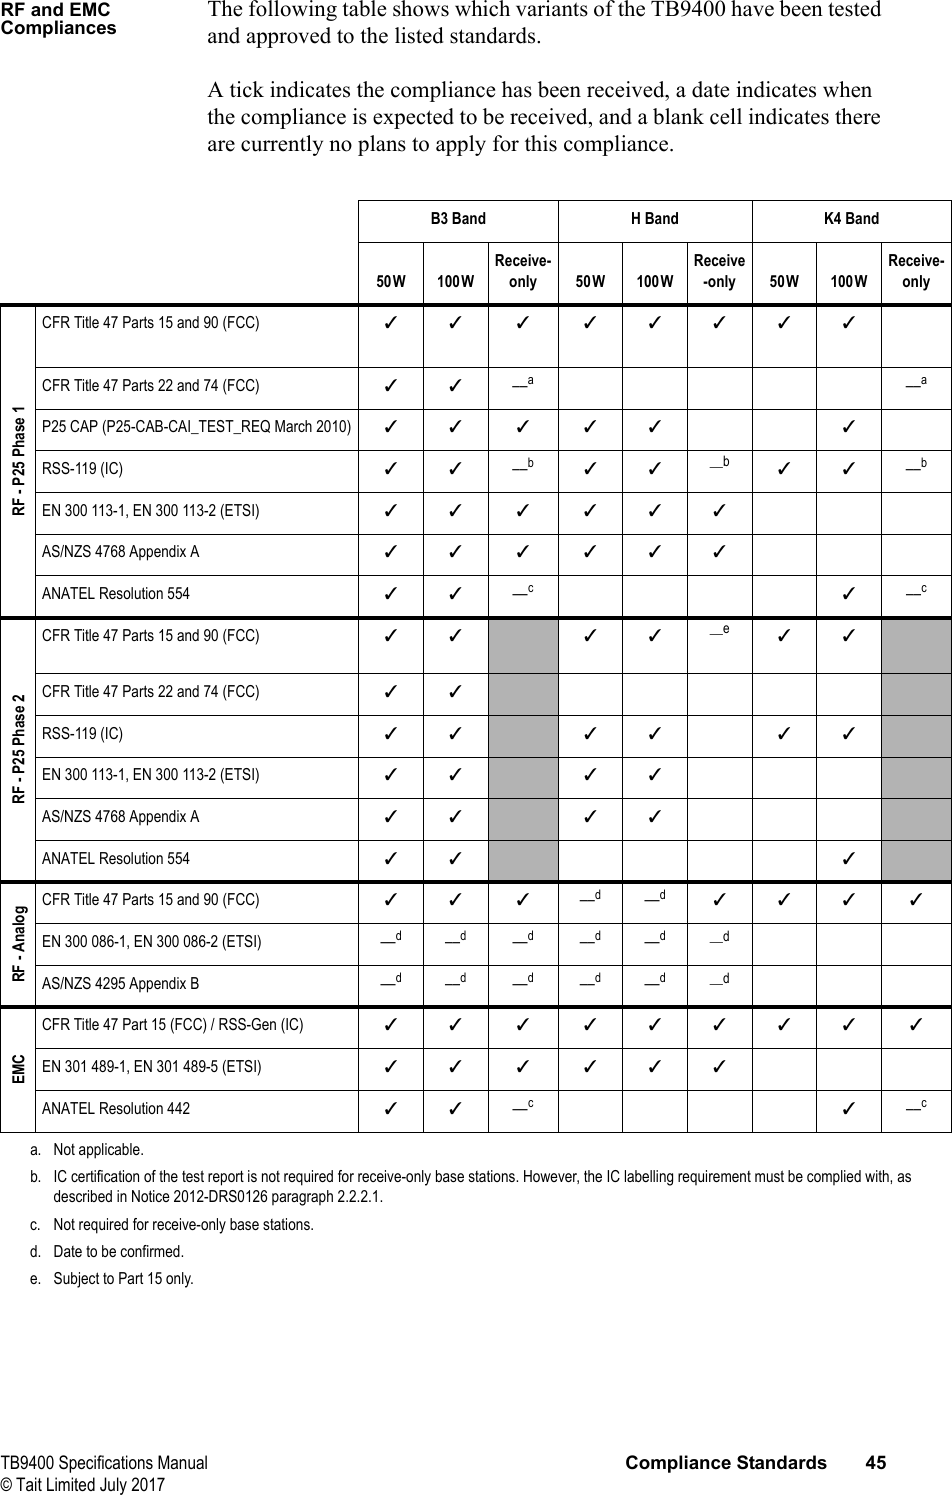  TB9400 Specifications Manual Compliance Standards 45© Tait Limited July 2017RF and EMC CompliancesThe following table shows which variants of the TB9400 have been tested and approved to the listed standards. A tick indicates the compliance has been received, a date indicates when the compliance is expected to be received, and a blank cell indicates there are currently no plans to apply for this compliance.B3 Band H Band K4 Band50W 100WReceive-only 50W 100WReceive-only 50W 100WReceive-onlyRF - P25 Phase 1CFR Title 47 Parts 15 and 90 (FCC) ✓✓ ✓ ✓✓✓✓✓CFR Title 47 Parts 22 and 74 (FCC) ✓✓––a––aP25 CAP (P25-CAB-CAI_TEST_REQ March 2010) ✓✓✓✓✓ ✓RSS-119 (IC) ✓✓––b✓✓__b ✓✓––bEN 300 113-1, EN 300 113-2 (ETSI) ✓✓ ✓ ✓✓✓AS/NZS 4768 Appendix A ✓✓ ✓ ✓✓✓ANATEL Resolution 554 ✓✓––c✓––cRF - P25 Phase 2CFR Title 47 Parts 15 and 90 (FCC) ✓✓ ✓✓__e ✓✓CFR Title 47 Parts 22 and 74 (FCC) ✓✓RSS-119 (IC) ✓✓ ✓✓ ✓✓EN 300 113-1, EN 300 113-2 (ETSI) ✓✓ ✓✓AS/NZS 4768 Appendix A ✓✓ ✓✓ANATEL Resolution 554 ✓✓ ✓RF - AnalogCFR Title 47 Parts 15 and 90 (FCC) ✓✓ ✓––d––d✓✓✓ ✓EN 300 086-1, EN 300 086-2 (ETSI) ––d––d––d––d––d__dAS/NZS 4295 Appendix B ––d––d––d––d––d__dEMCCFR Title 47 Part 15 (FCC) / RSS-Gen (IC) ✓✓ ✓ ✓✓✓✓✓ ✓EN 301 489-1, EN 301 489-5 (ETSI) ✓✓ ✓ ✓✓✓ANATEL Resolution 442 ✓✓––c✓––ca. Not applicable.b. IC certification of the test report is not required for receive-only base stations. However, the IC labelling requirement must be complied with, as described in Notice 2012-DRS0126 paragraph 2.2.2.1.c. Not required for receive-only base stations.d. Date to be confirmed.e. Subject to Part 15 only.